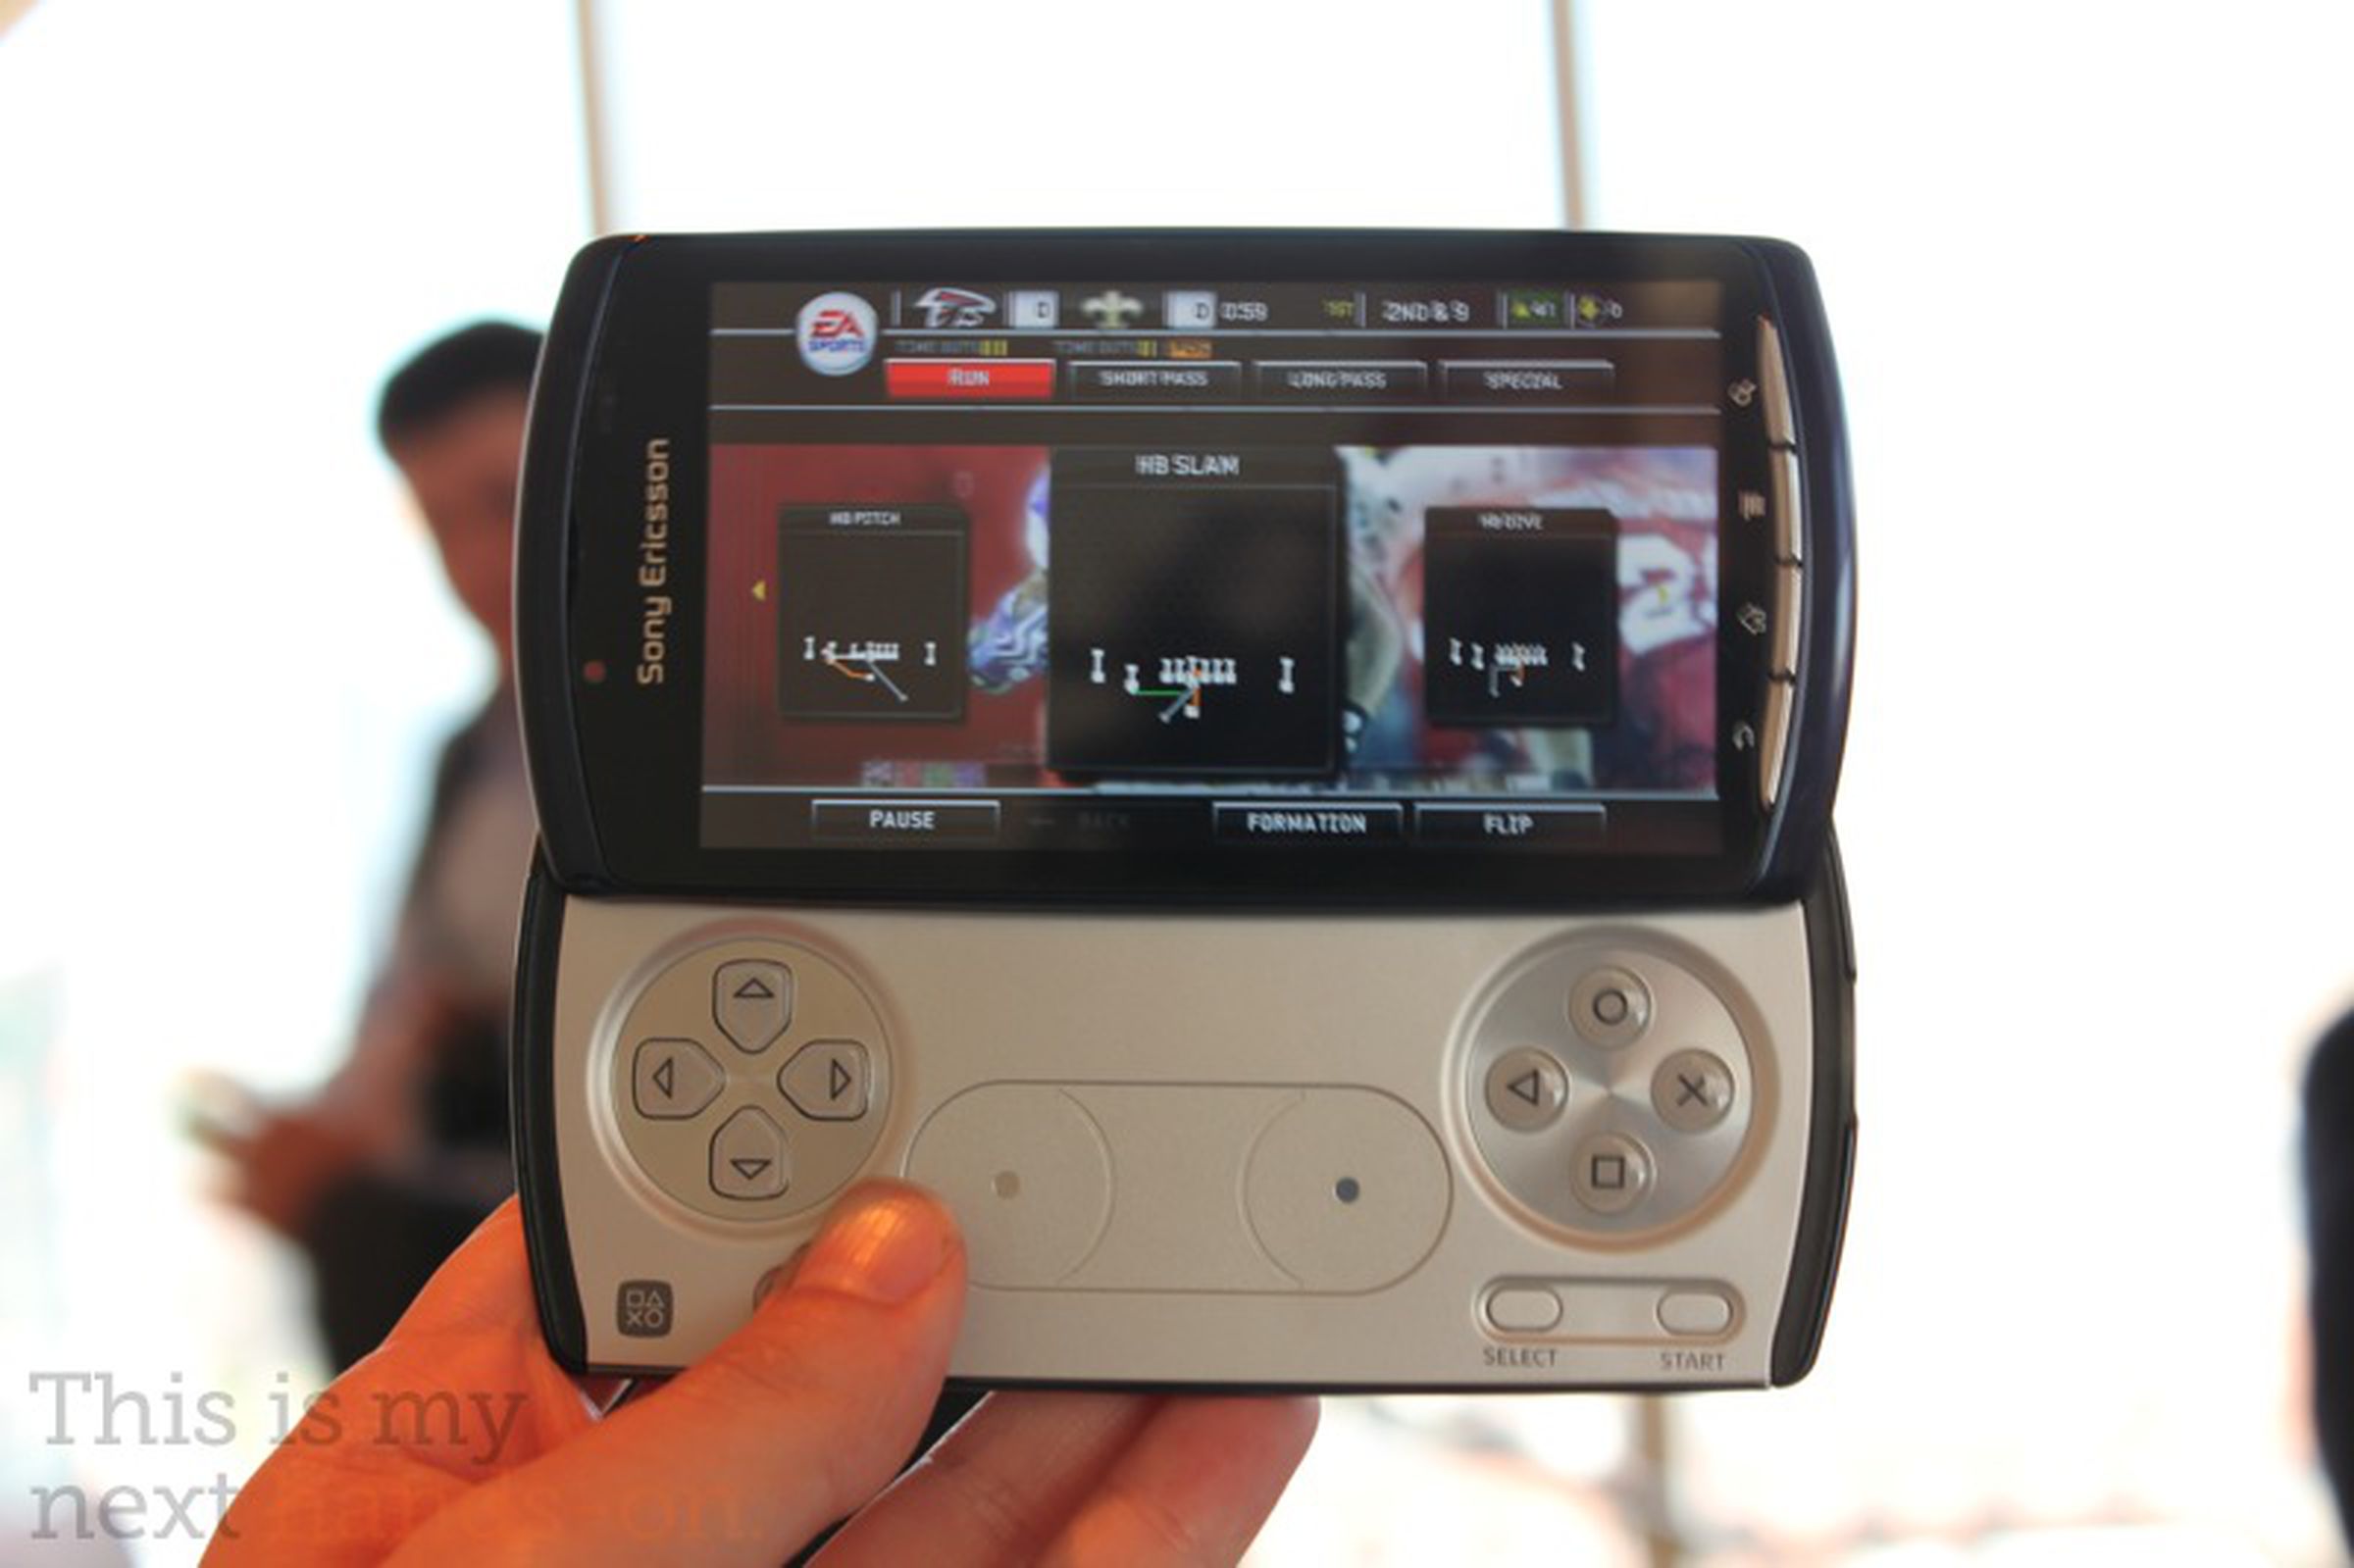 Xperia Play for AT&T hands-on pictures